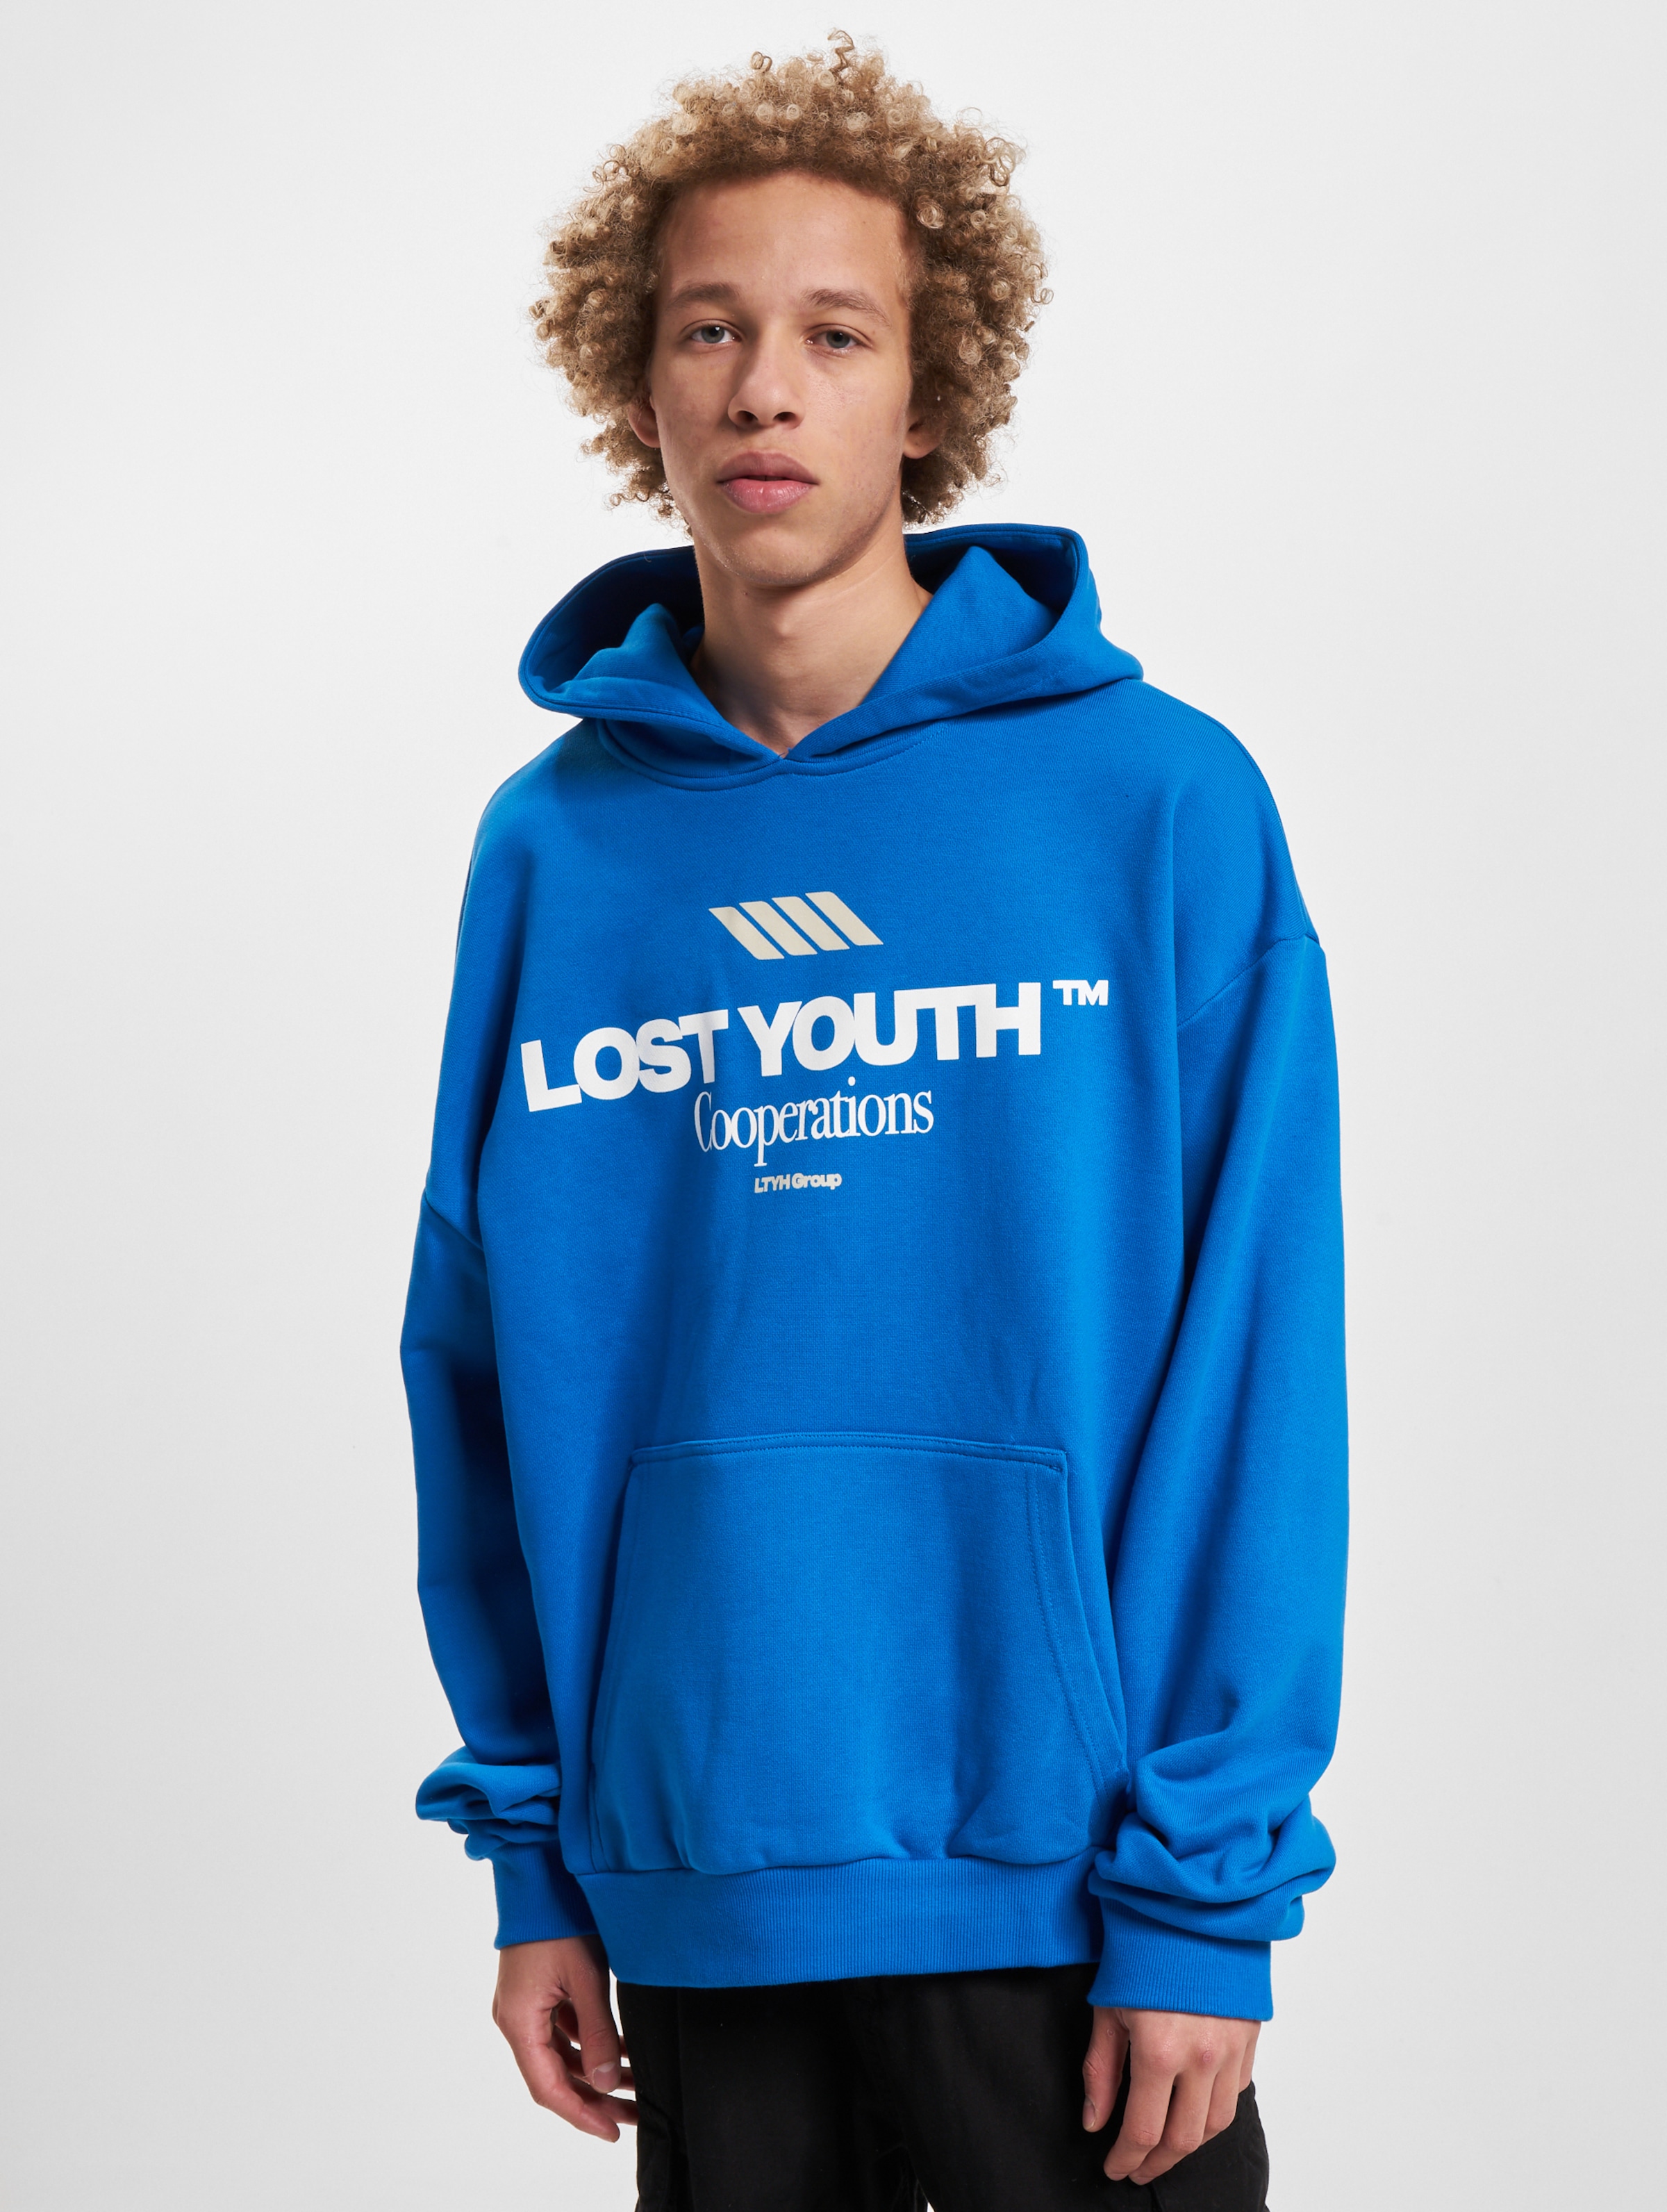 Lost Youth LY HOODY - COOPERATIONS Mannen op kleur blauw, Maat 5XL